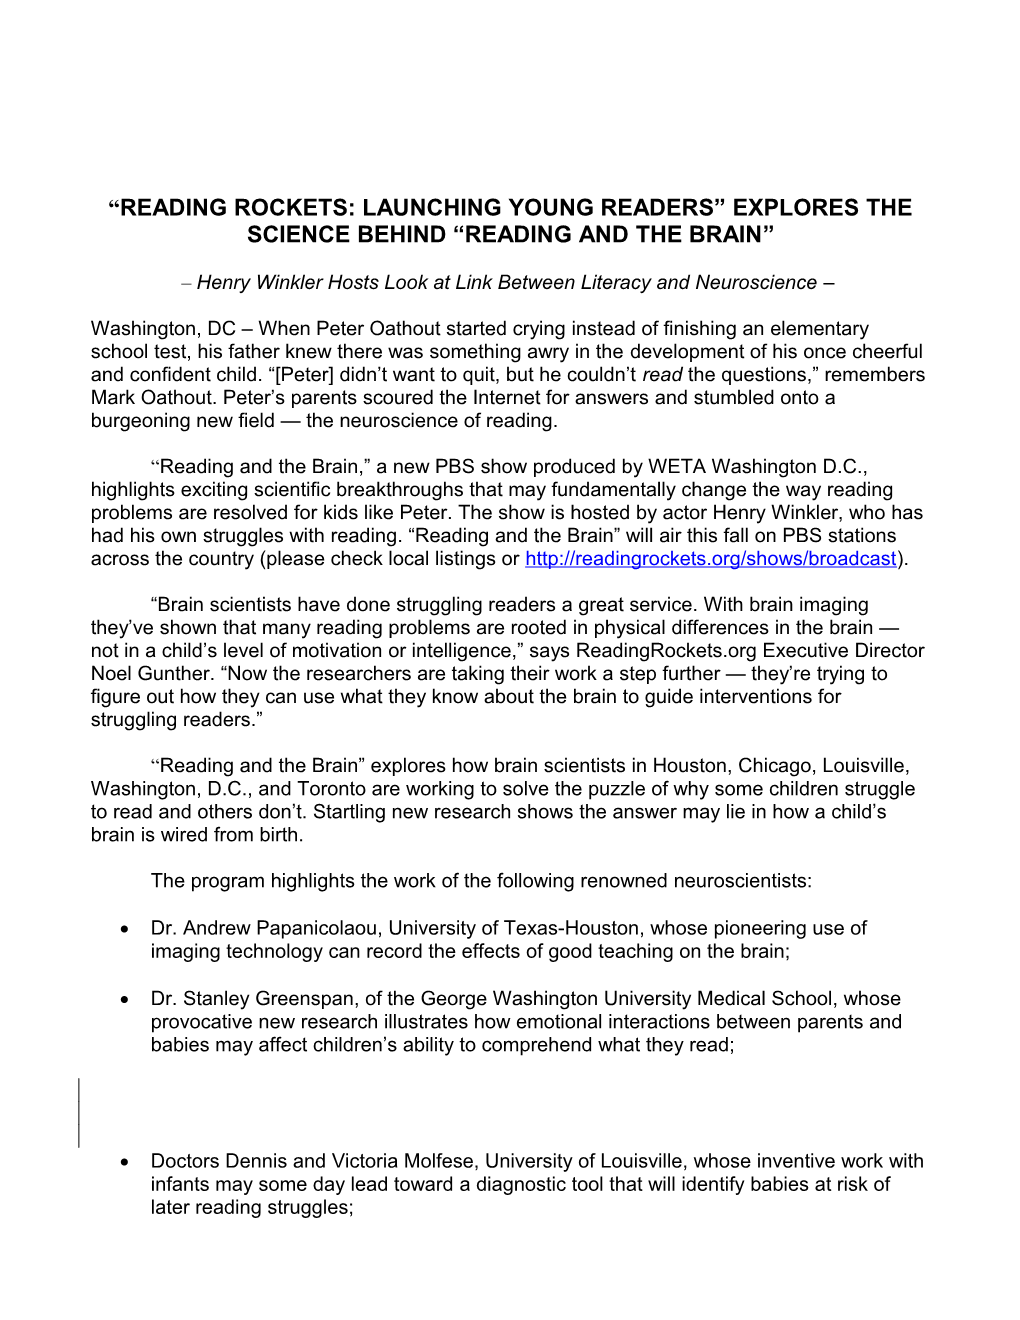 Reading and the Brain, the # Th Episode of the Acclaimed Reading Rockets: Launching Young